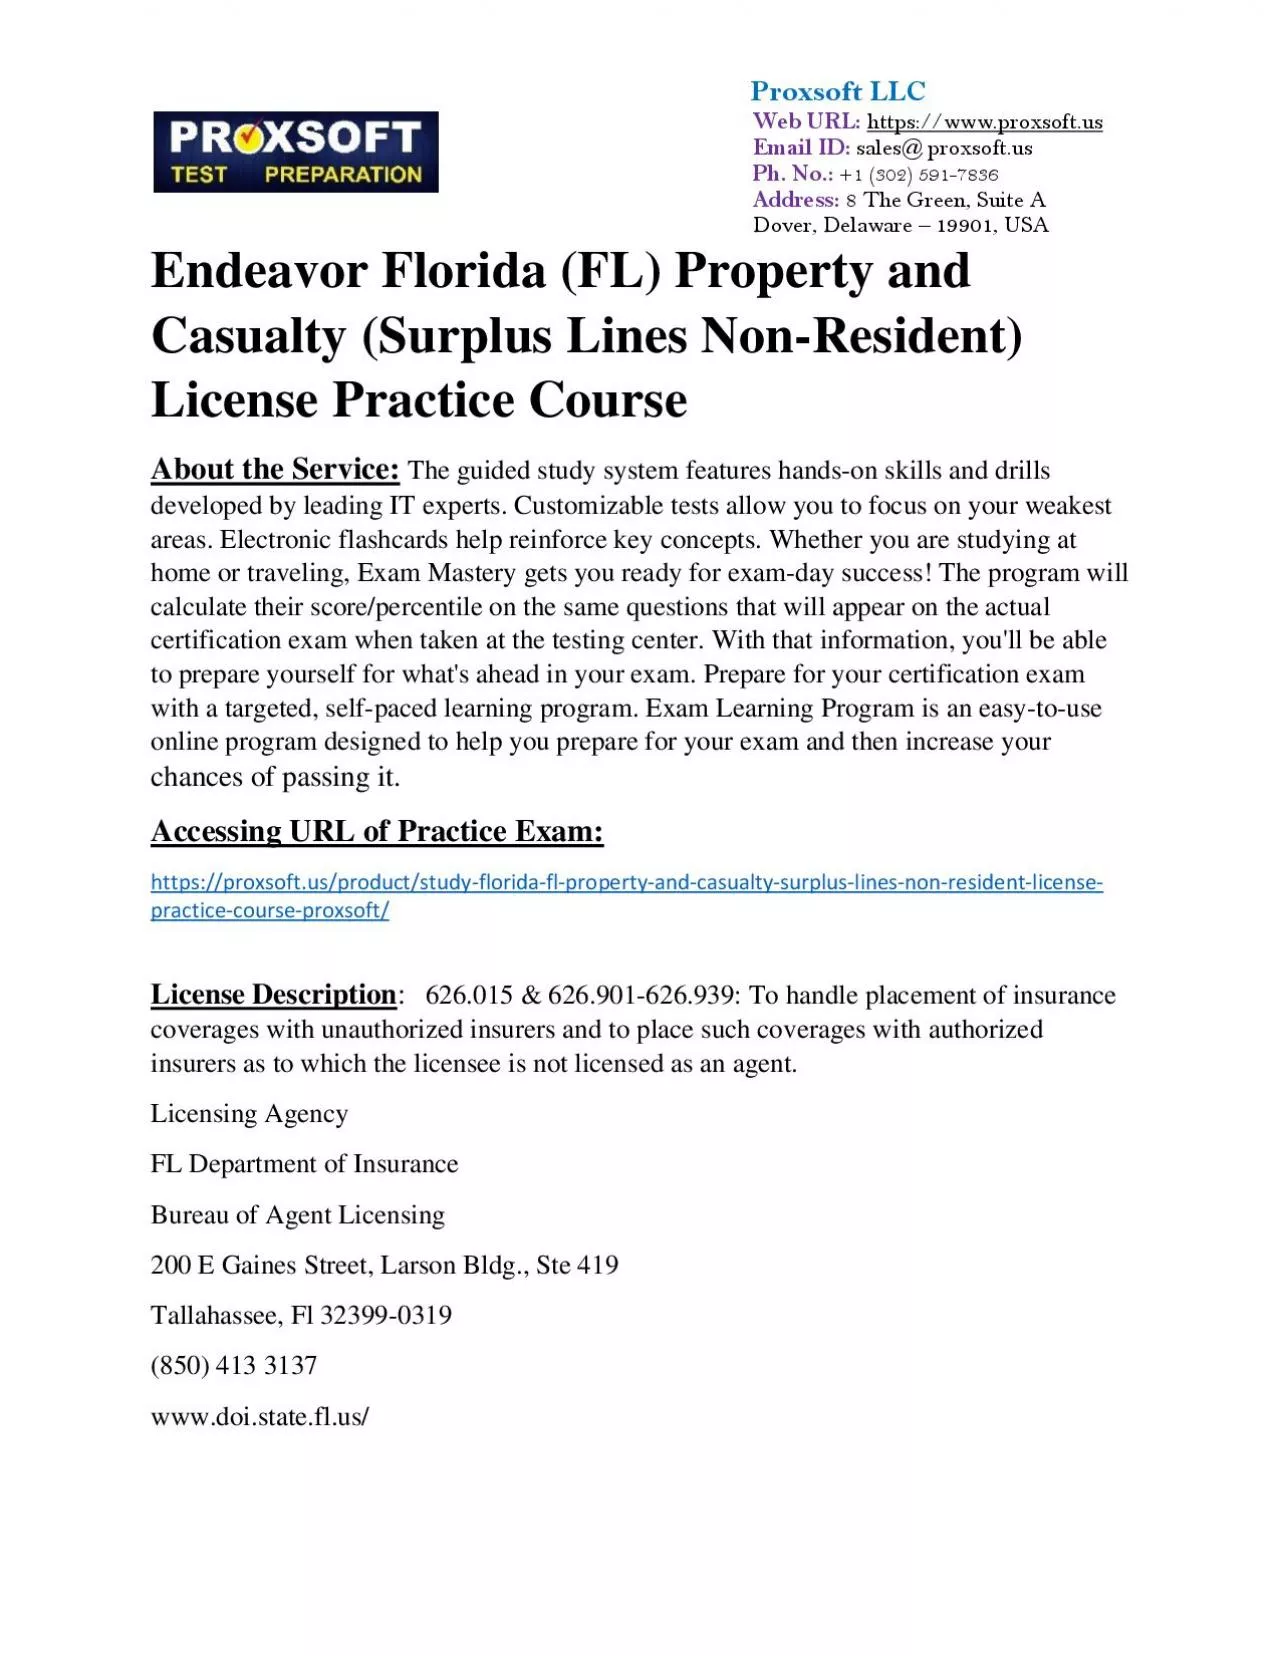 Endeavor Florida (FL) Property and Casualty (Surplus Lines Non-Resident) License Practice